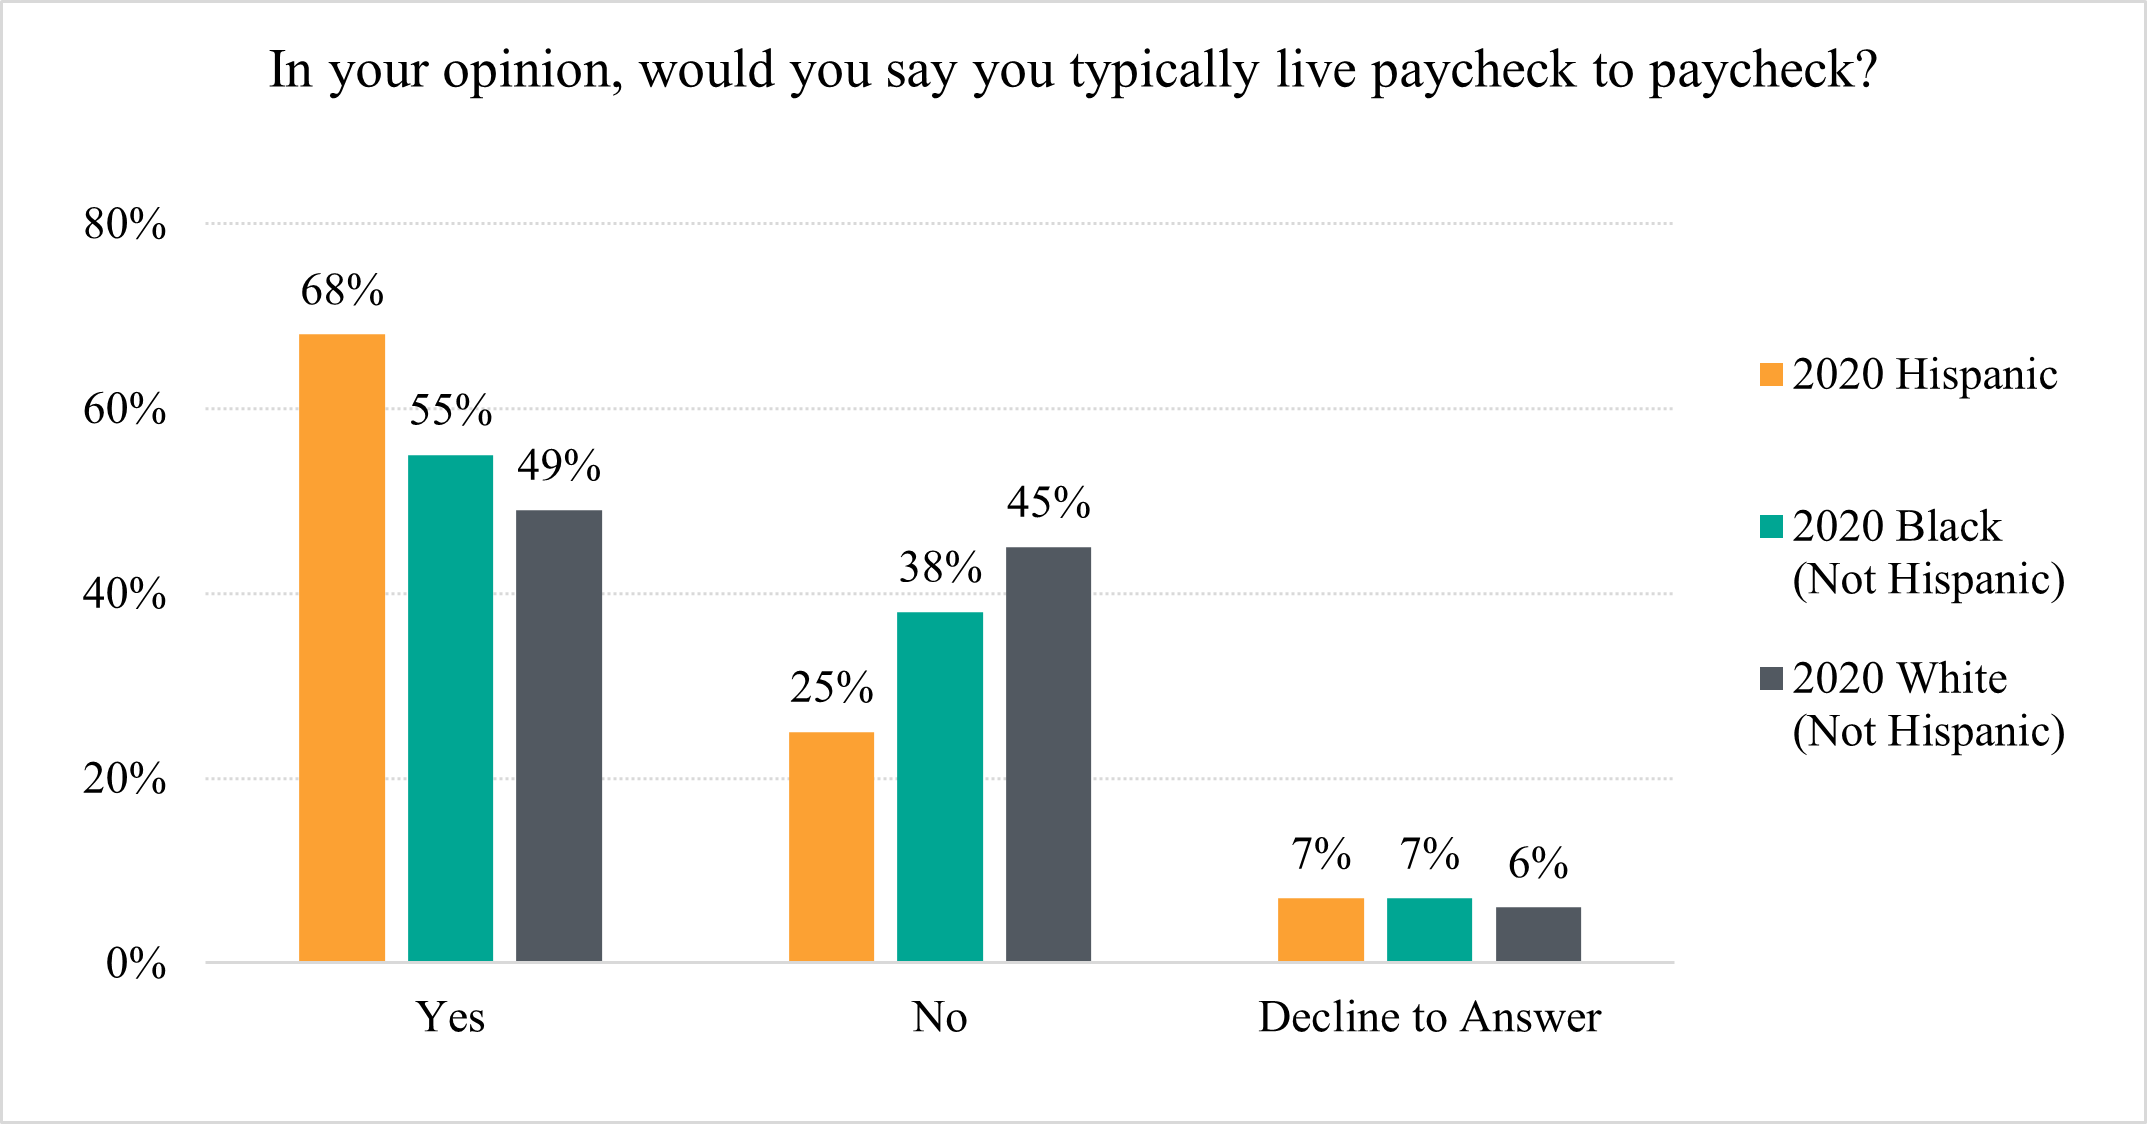 Bar chart showing that Hispanic Americans are significantly more likely than Black/non-Hispanic Americans and white/non-Hispanic Americans to say they typically live paycheck to paycheck.